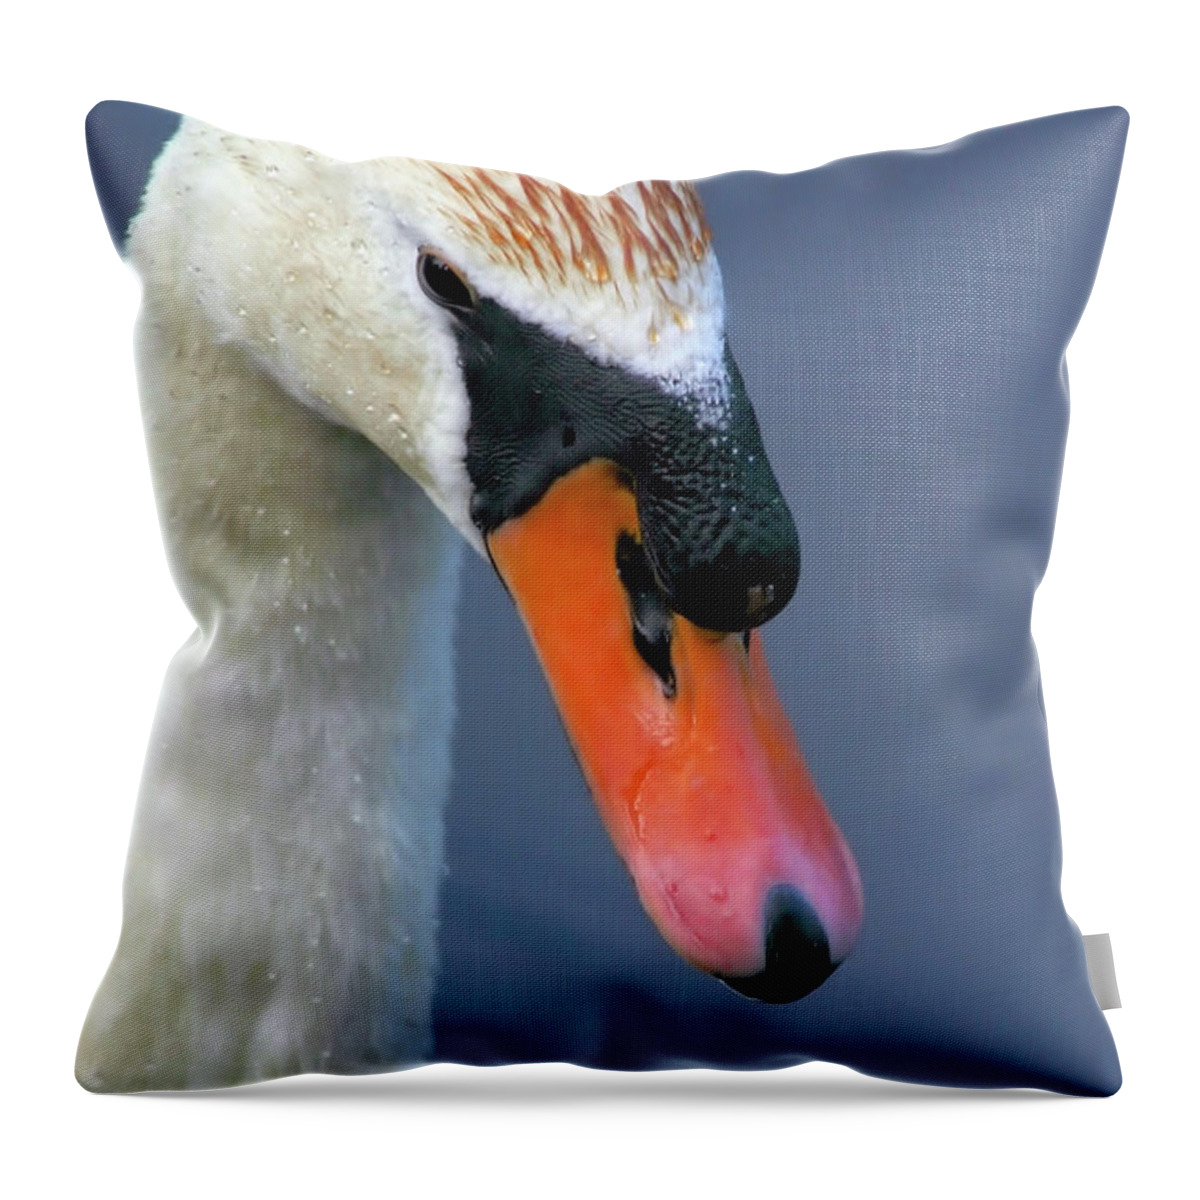 Swan Throw Pillow featuring the photograph Mute Swan by Karol Livote